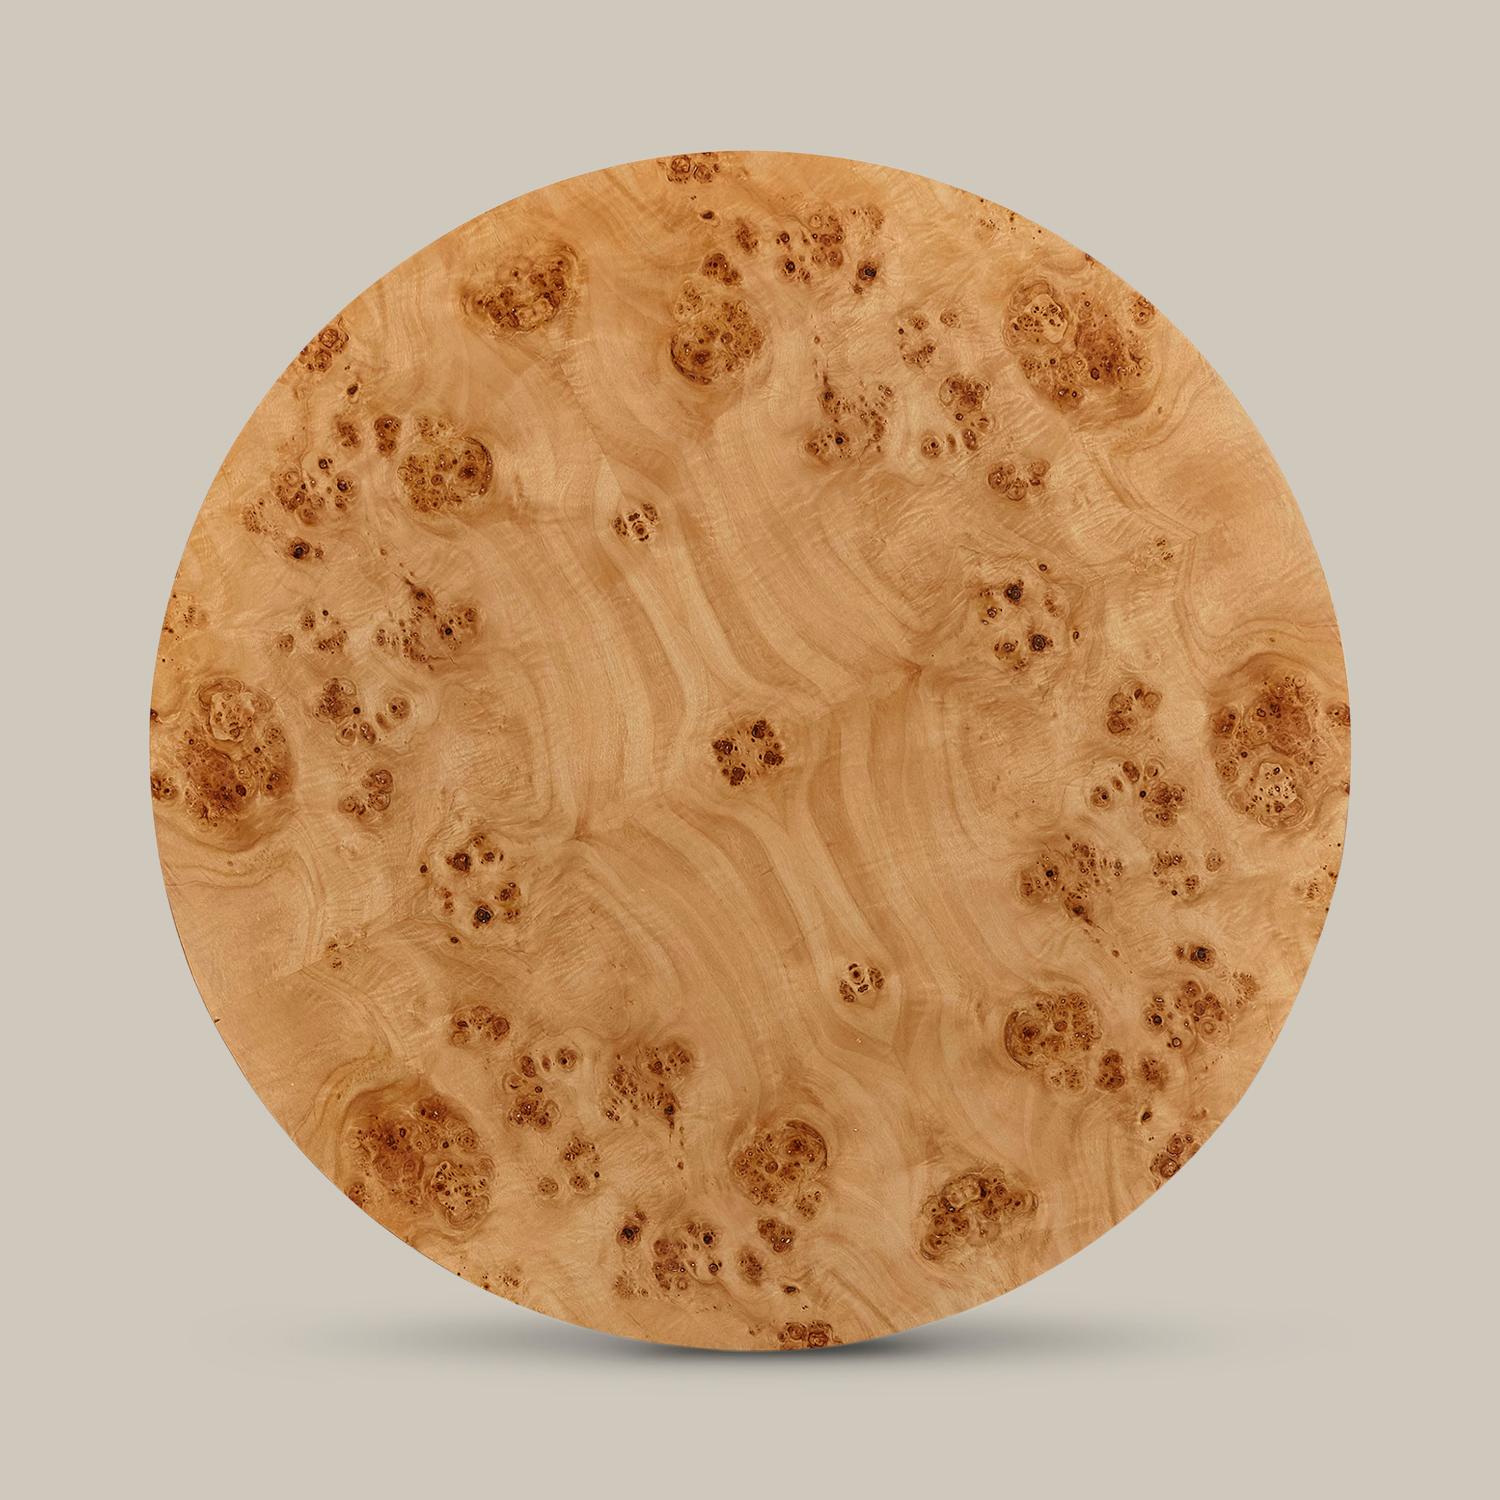 As one of our best sellers, the Rondel Bunching cocktail table provides a modern twist on a classic natural material. Two cylindrical forms make an artful, bunching cocktail table and celebrate the natural Mappa burl wood for a functional addition